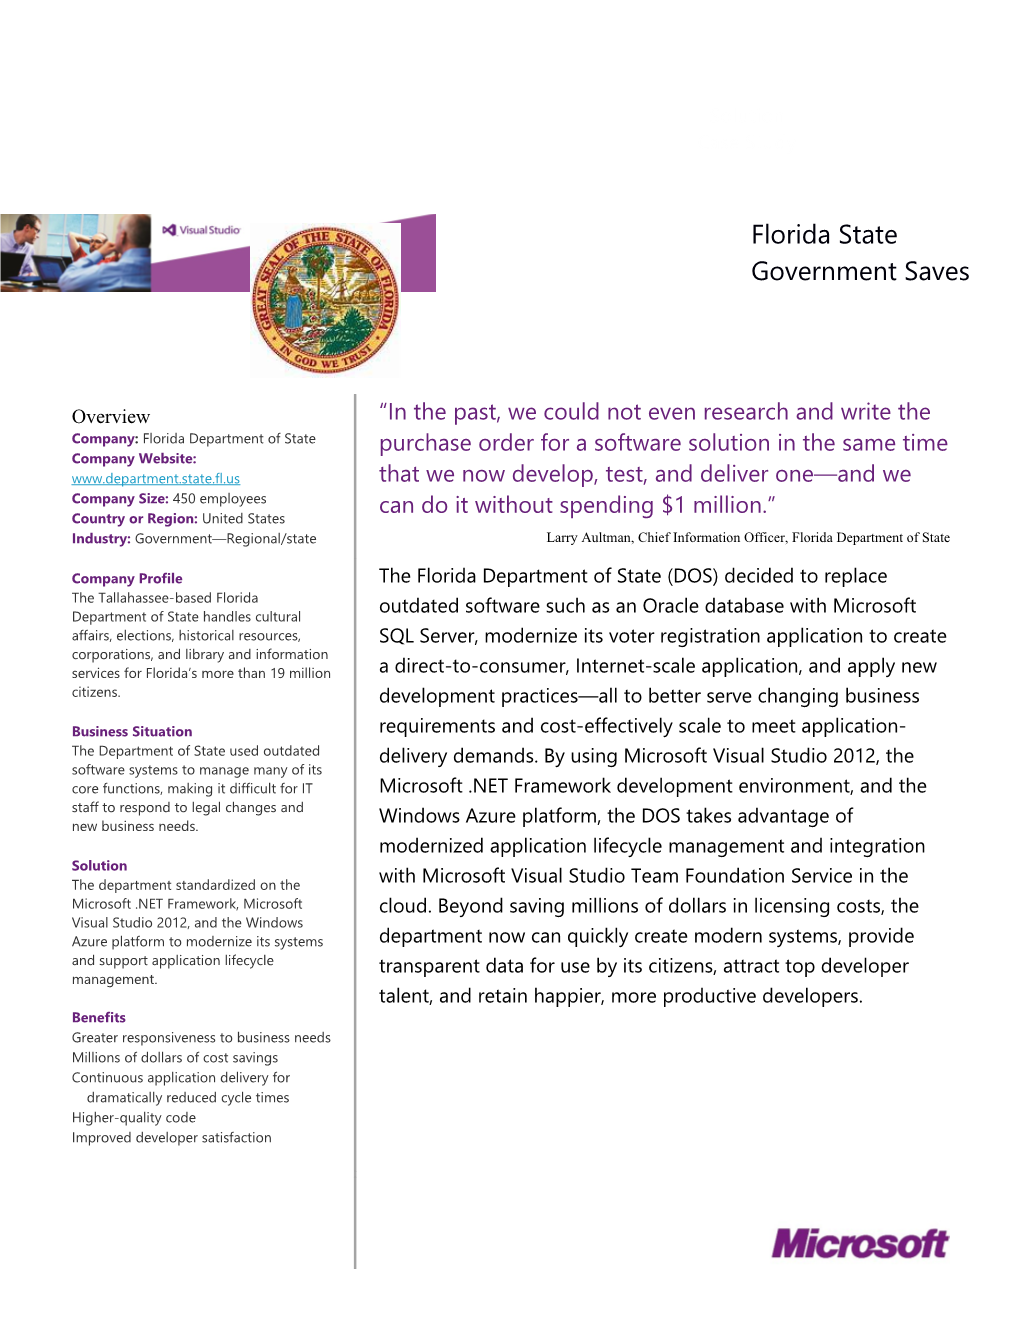 Florida State Government Saves Millions Through Software Development Overhaul